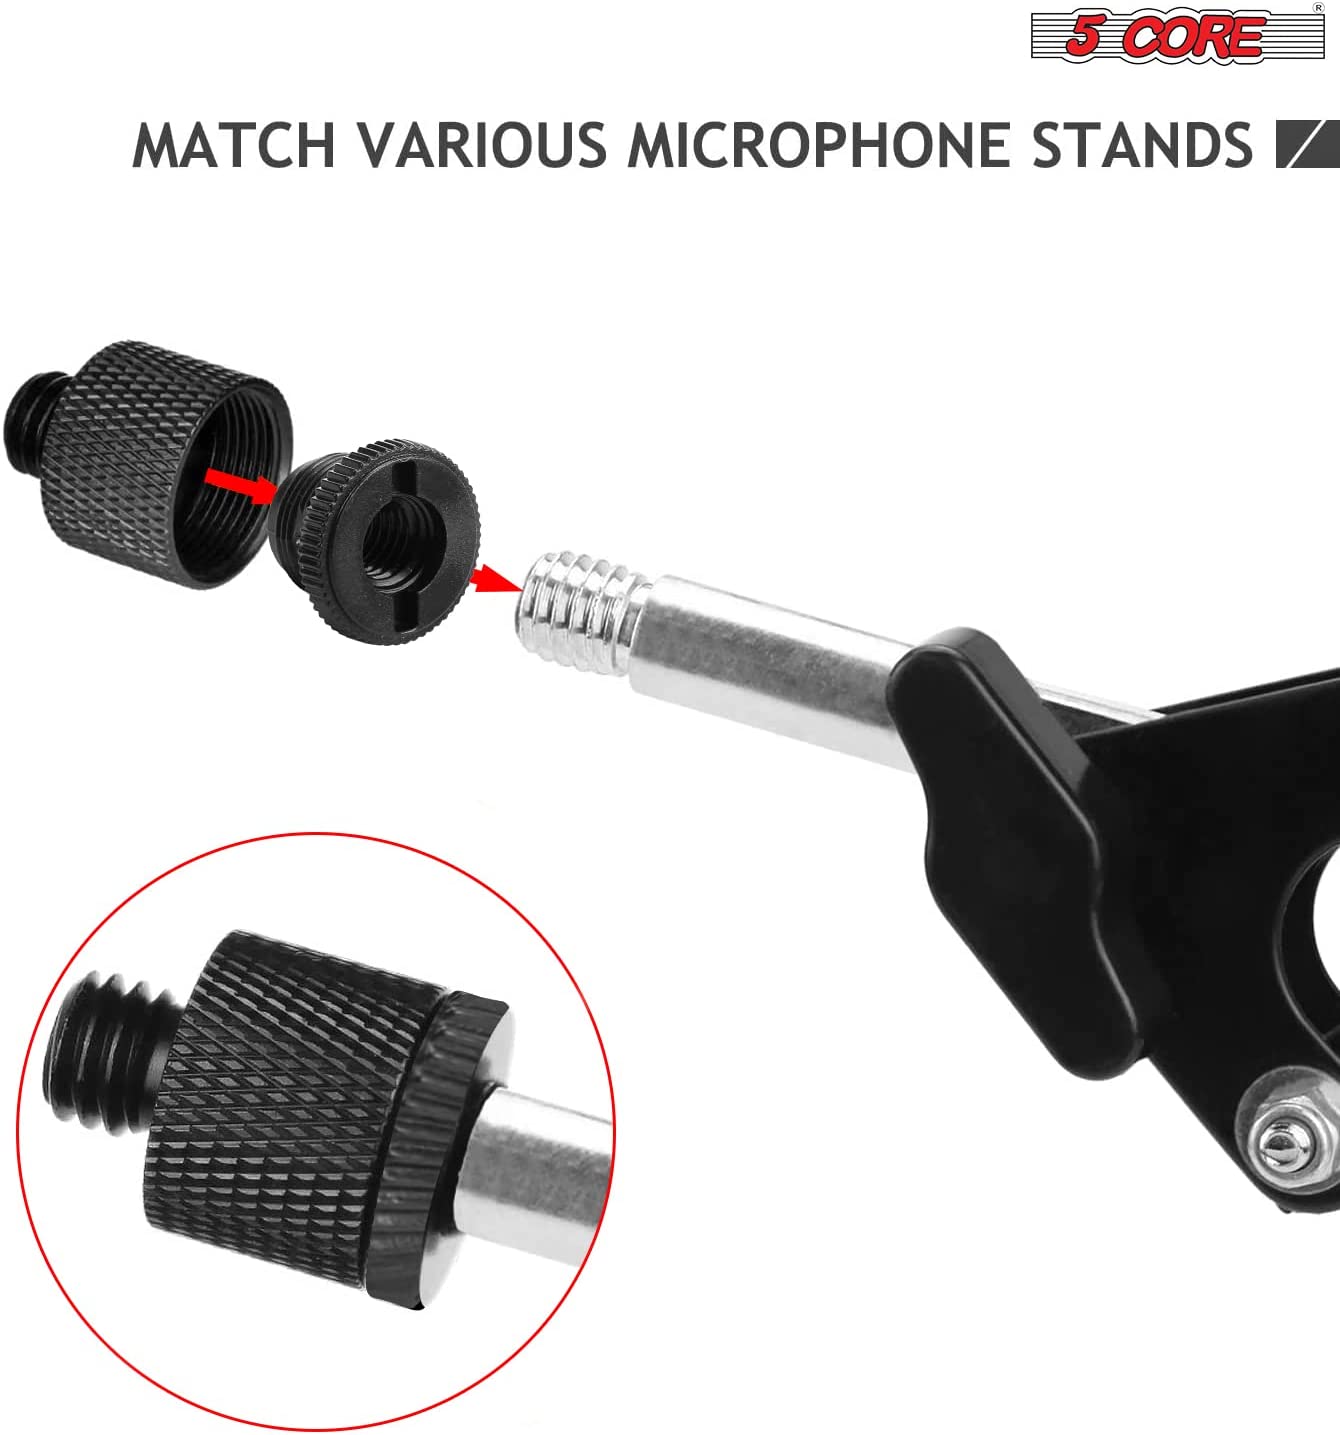 5 Core Mic Stand Adapter 2 Pieces Black 3/8 Female to 5/8 Male Plastic Mic Screw Adapter Microphone Tripod Stand Screw - MS ADP P BLK 2PCS